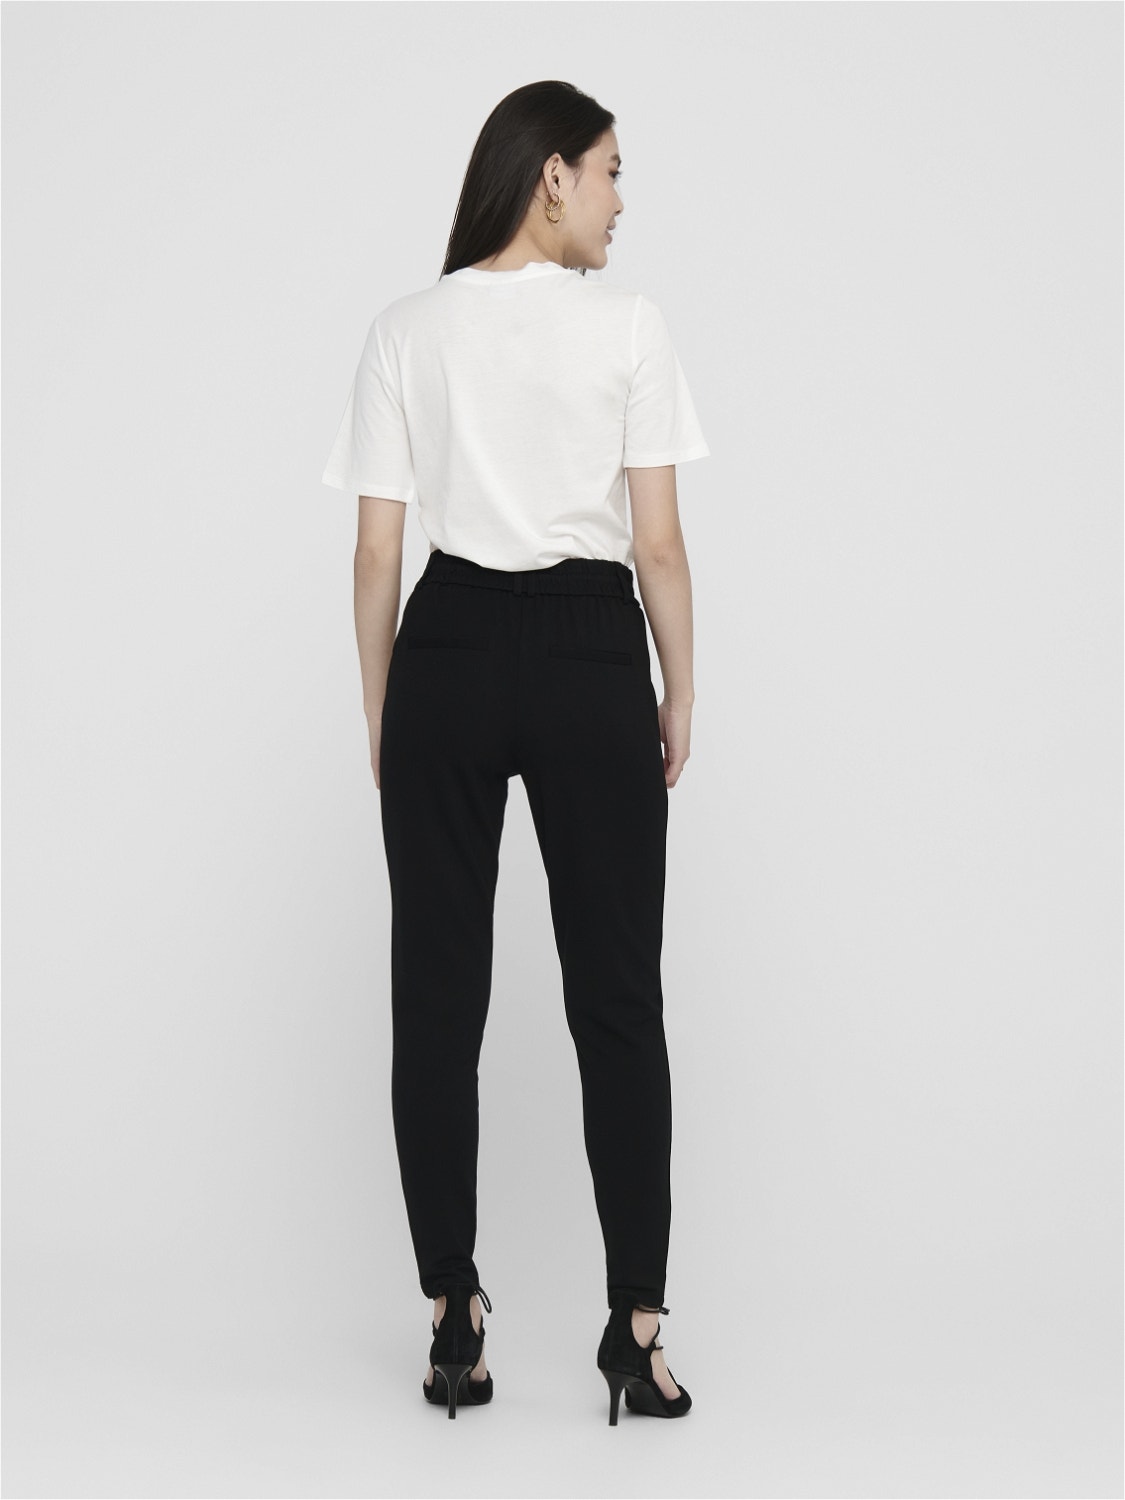 ONLY Regular Fit Trousers -Black - 15115847